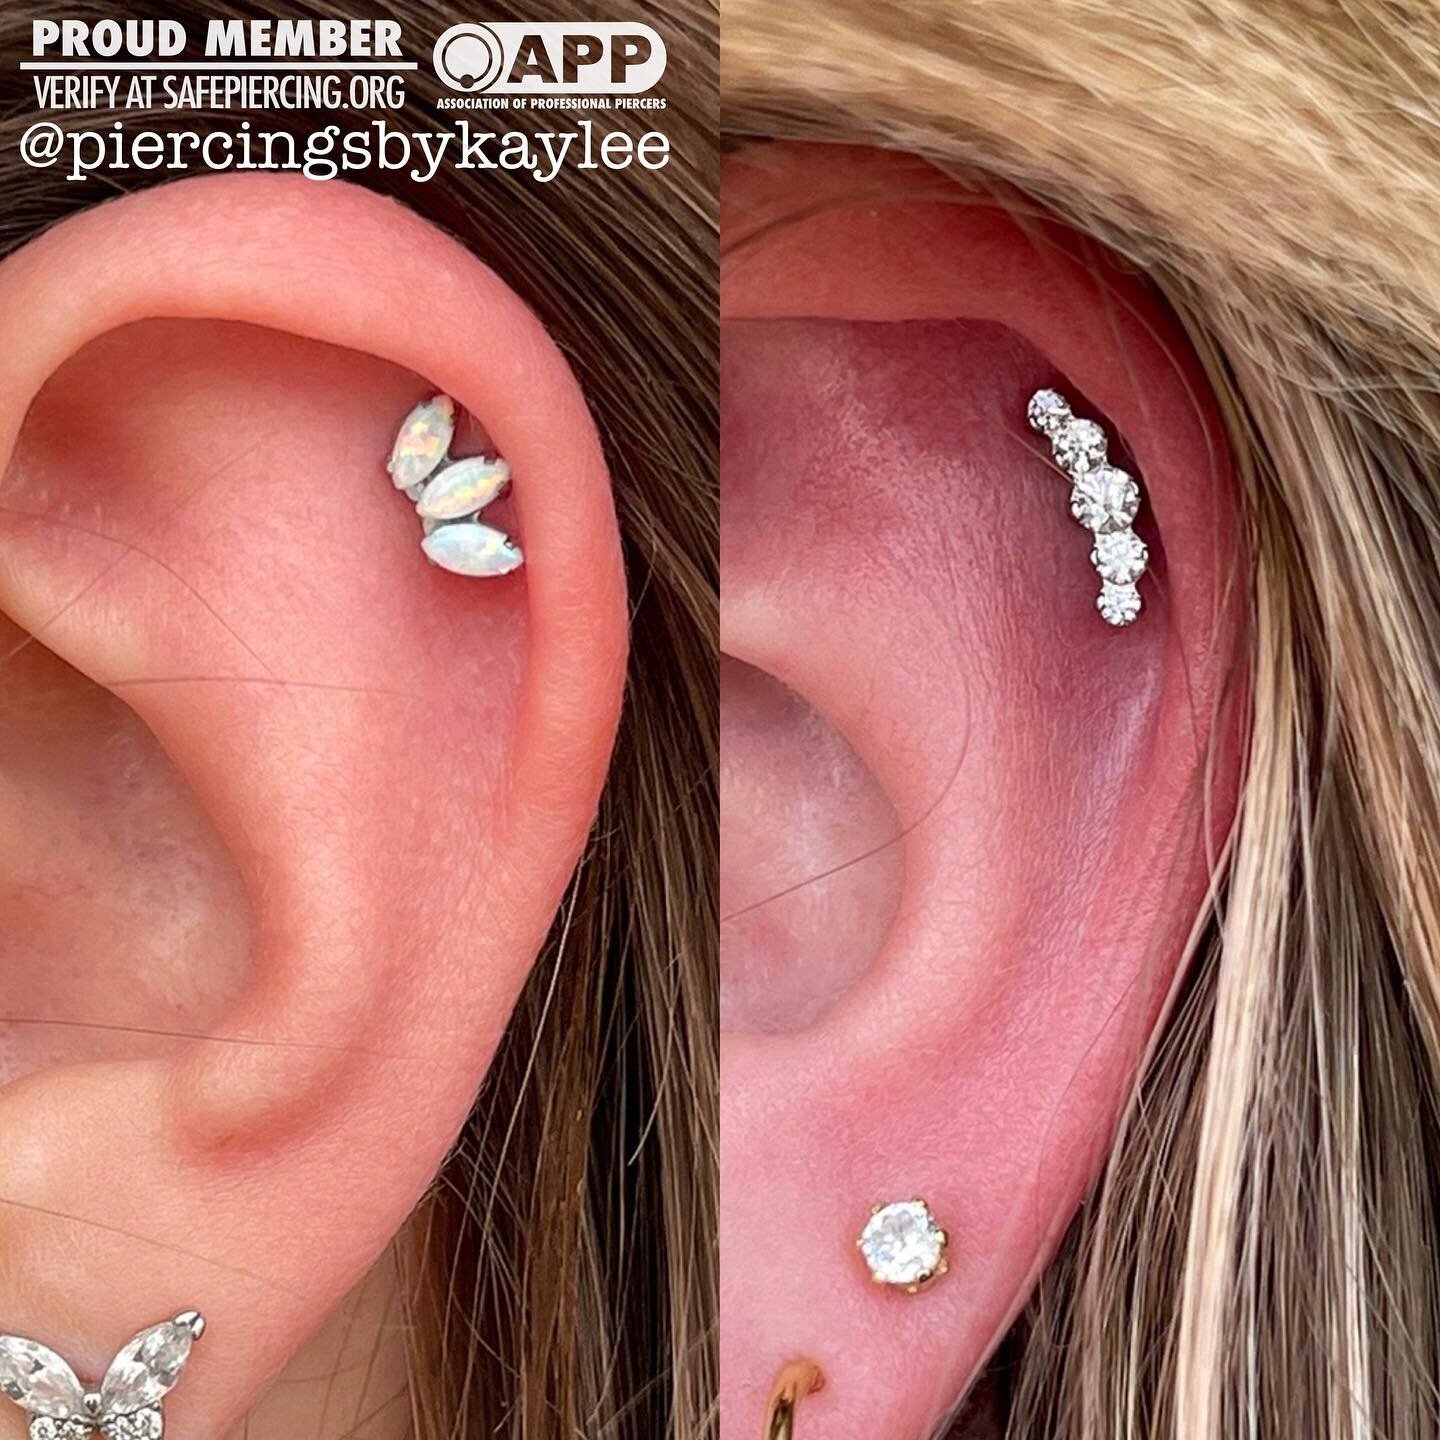 When friends get pierced together✨ both fresh helix piercings! in the first photo is a marquise fan with white opals. Second photo featuring a odyssey 5 gem cluster with white CZ&rsquo;s🌿
.
.
.
.
#pierced #earpiercing #piercedears #isbodyjewelry #op